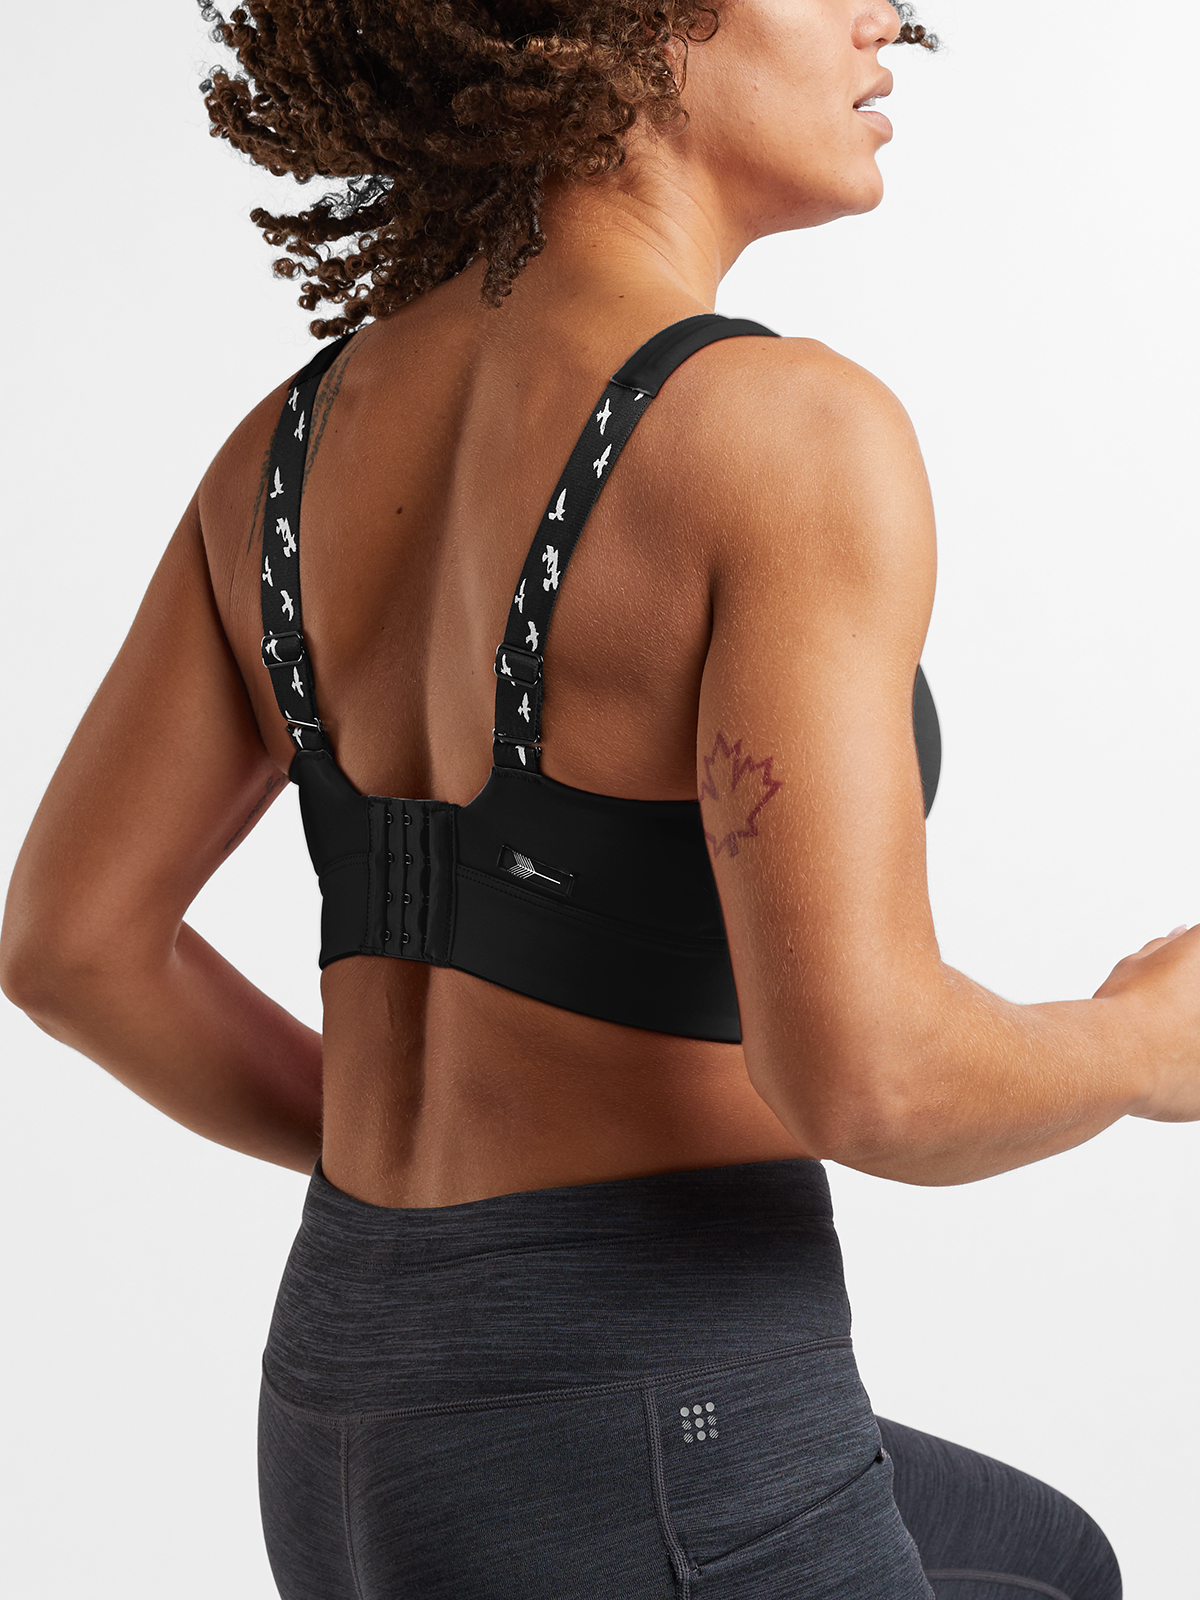 Wait, What About The Oiselle Cat Lady Sports Bra?